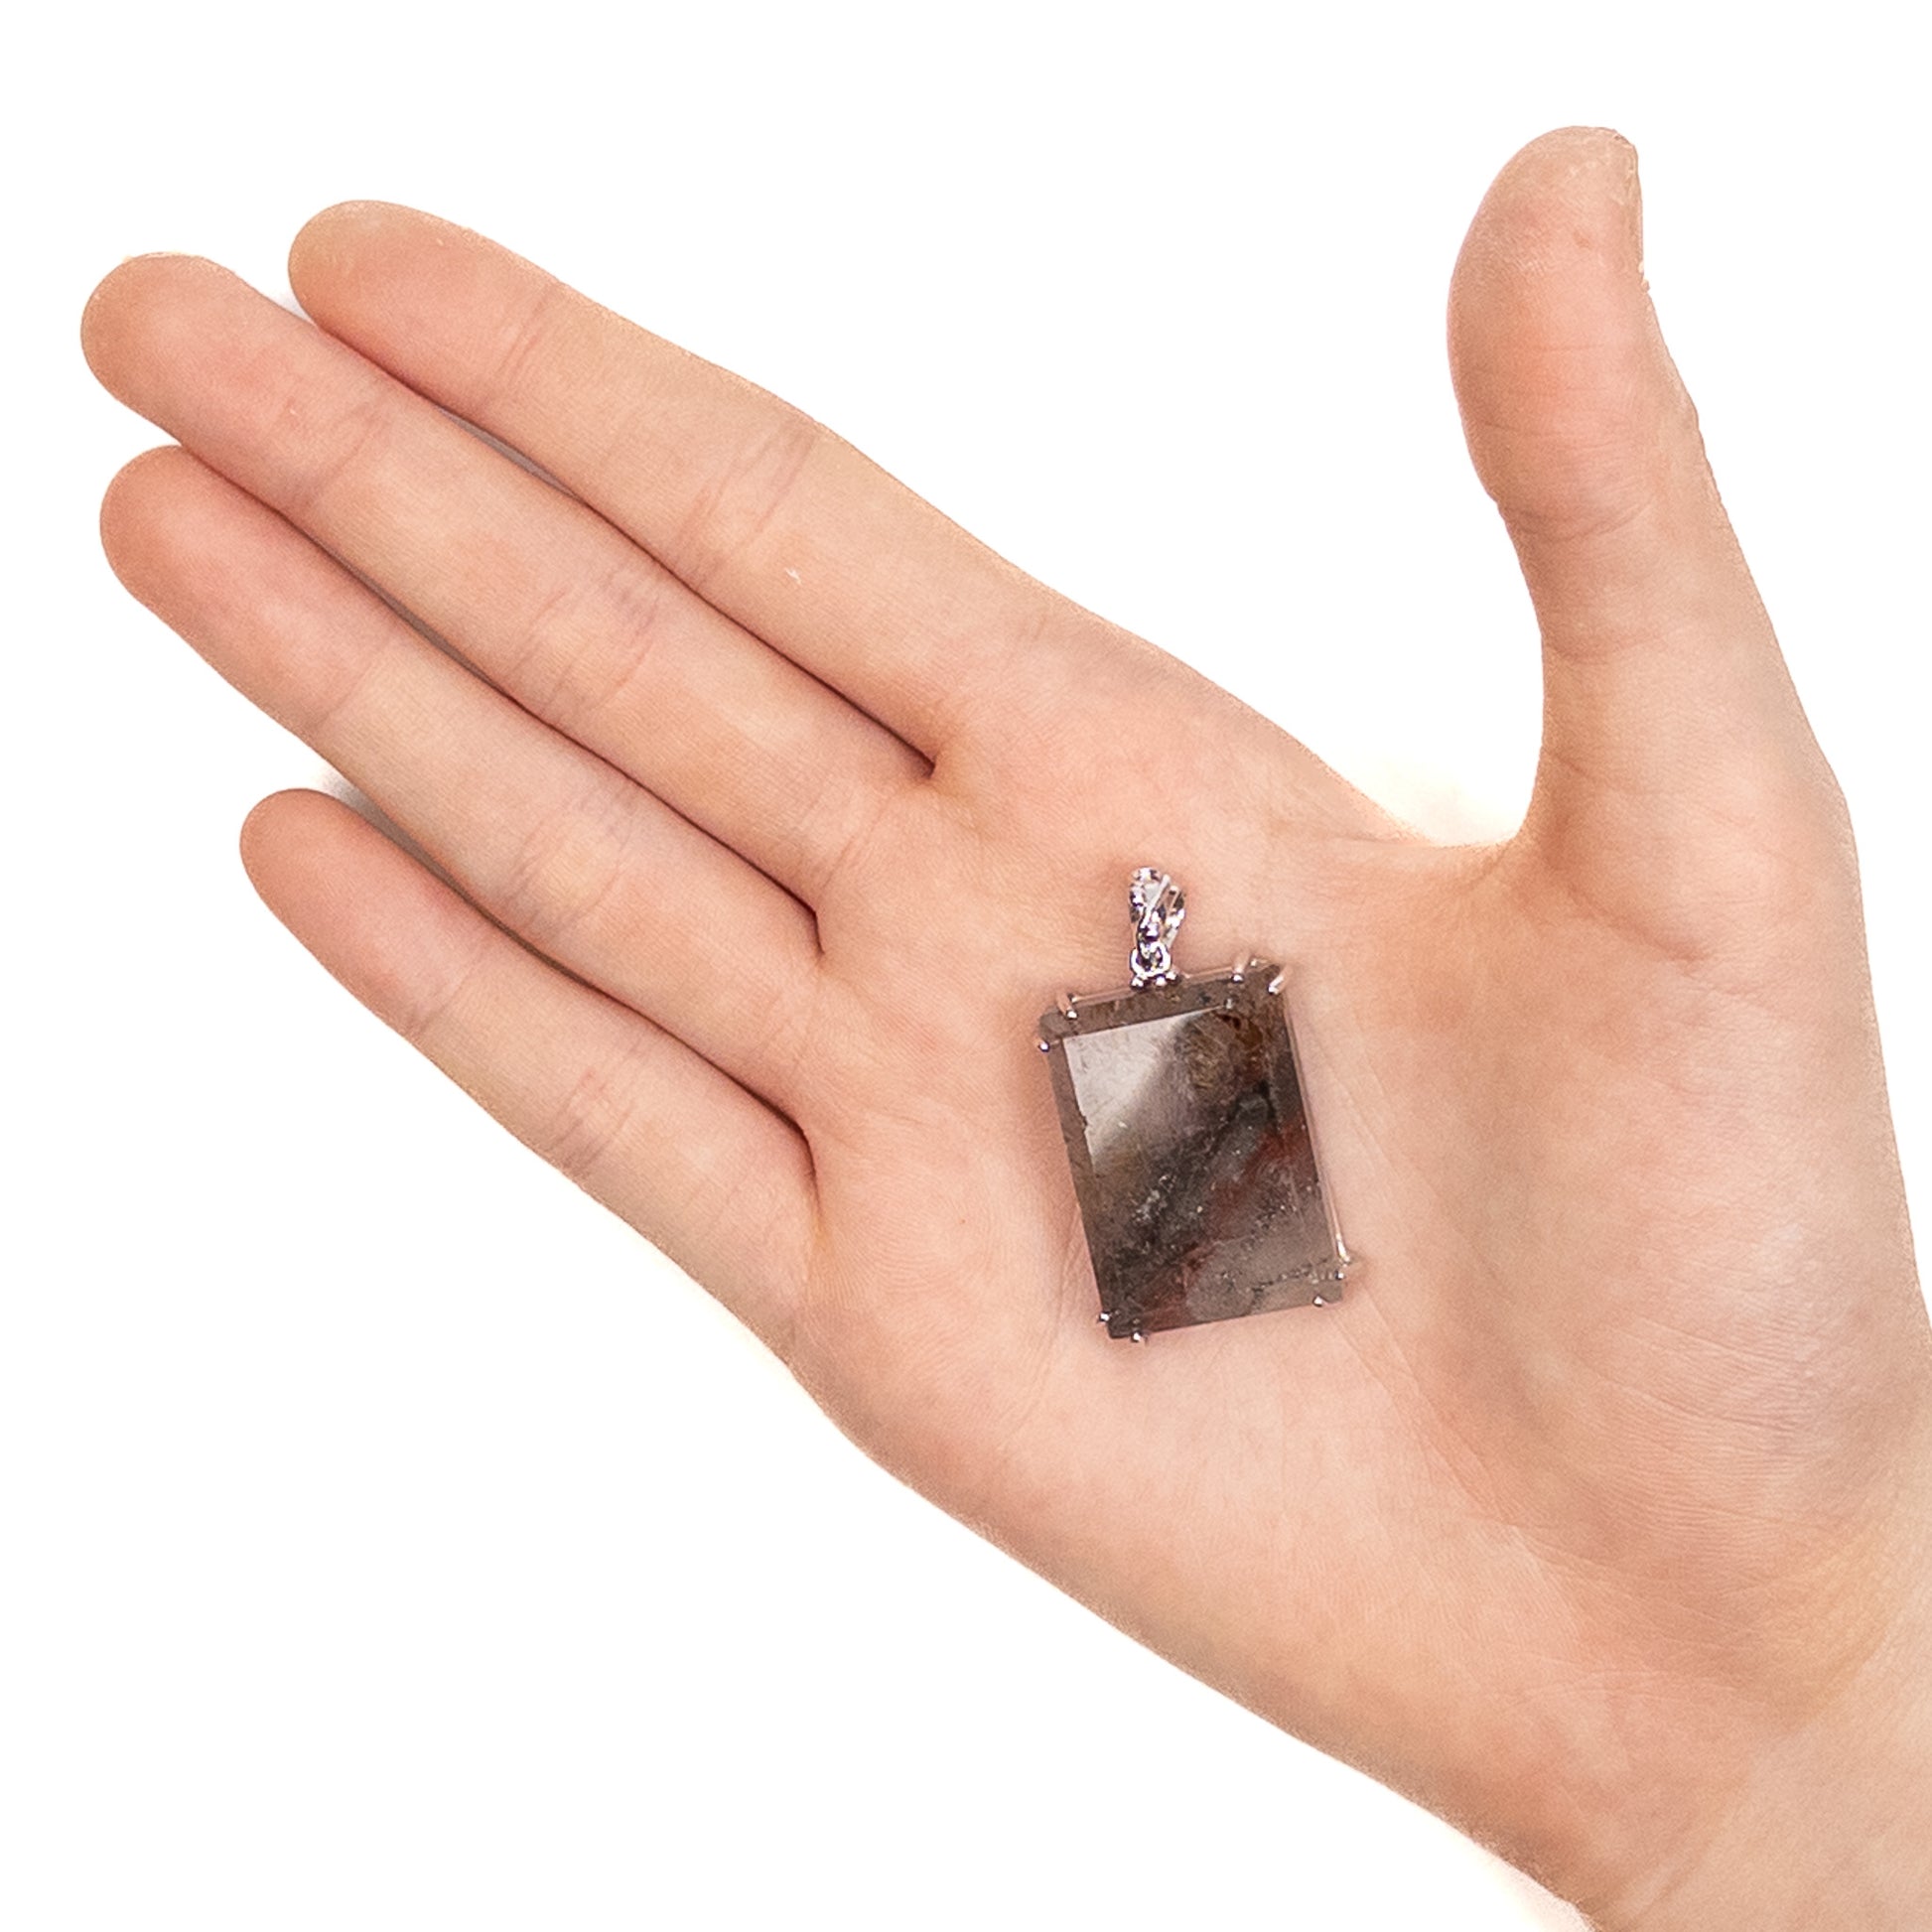 Auralite 23 Faceted Rectangle Pendant with Sterling Silver - 1 pc.-The Bead Gallery Honolulu